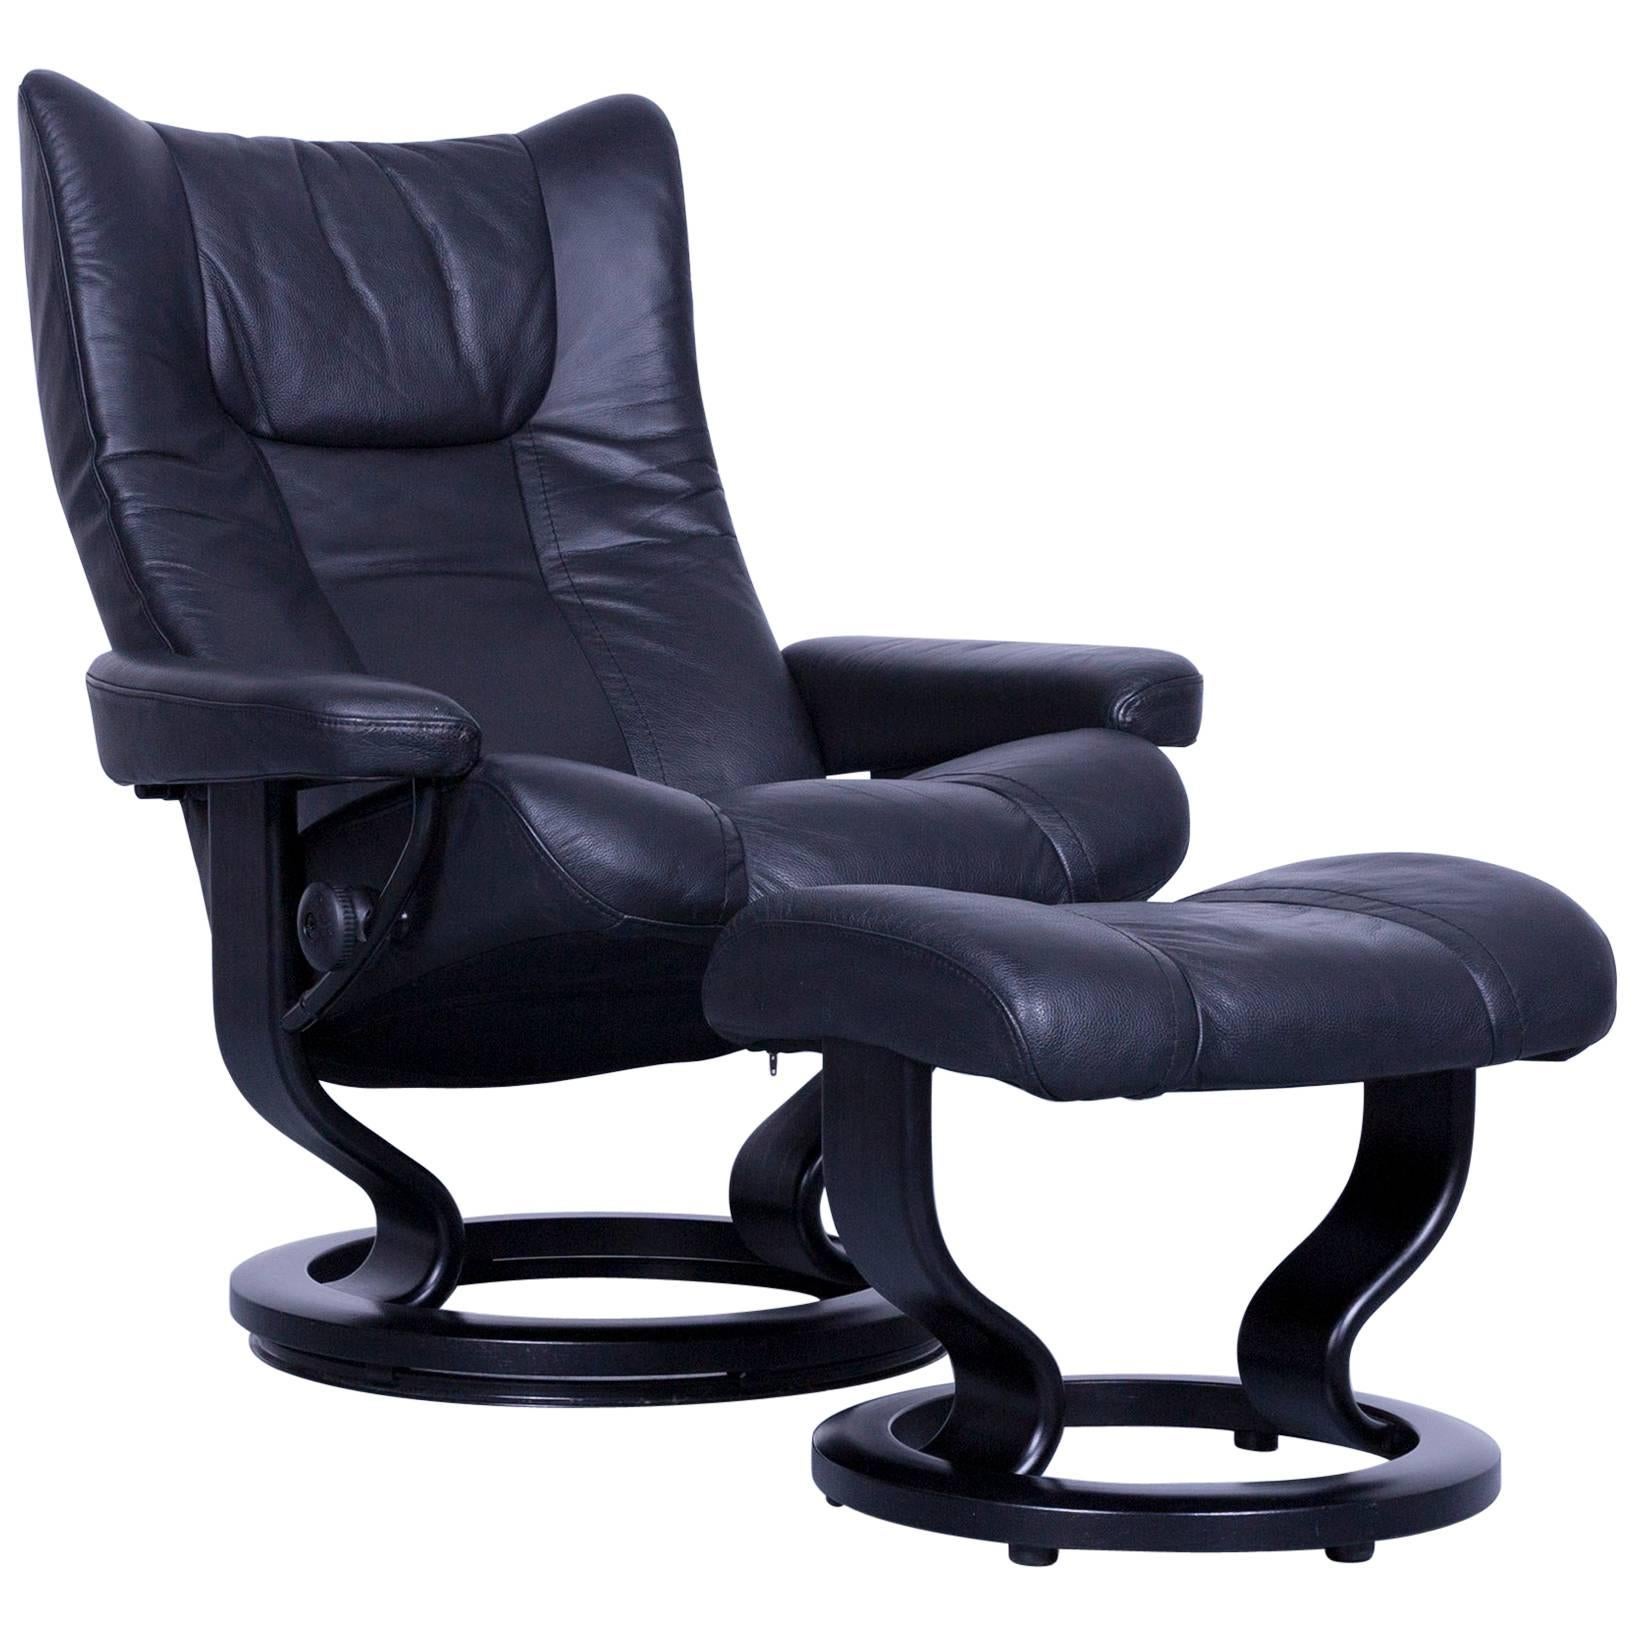 Ekornes Stressless Wing Armchair and Footstool Black Leather Recliner Chair For Sale